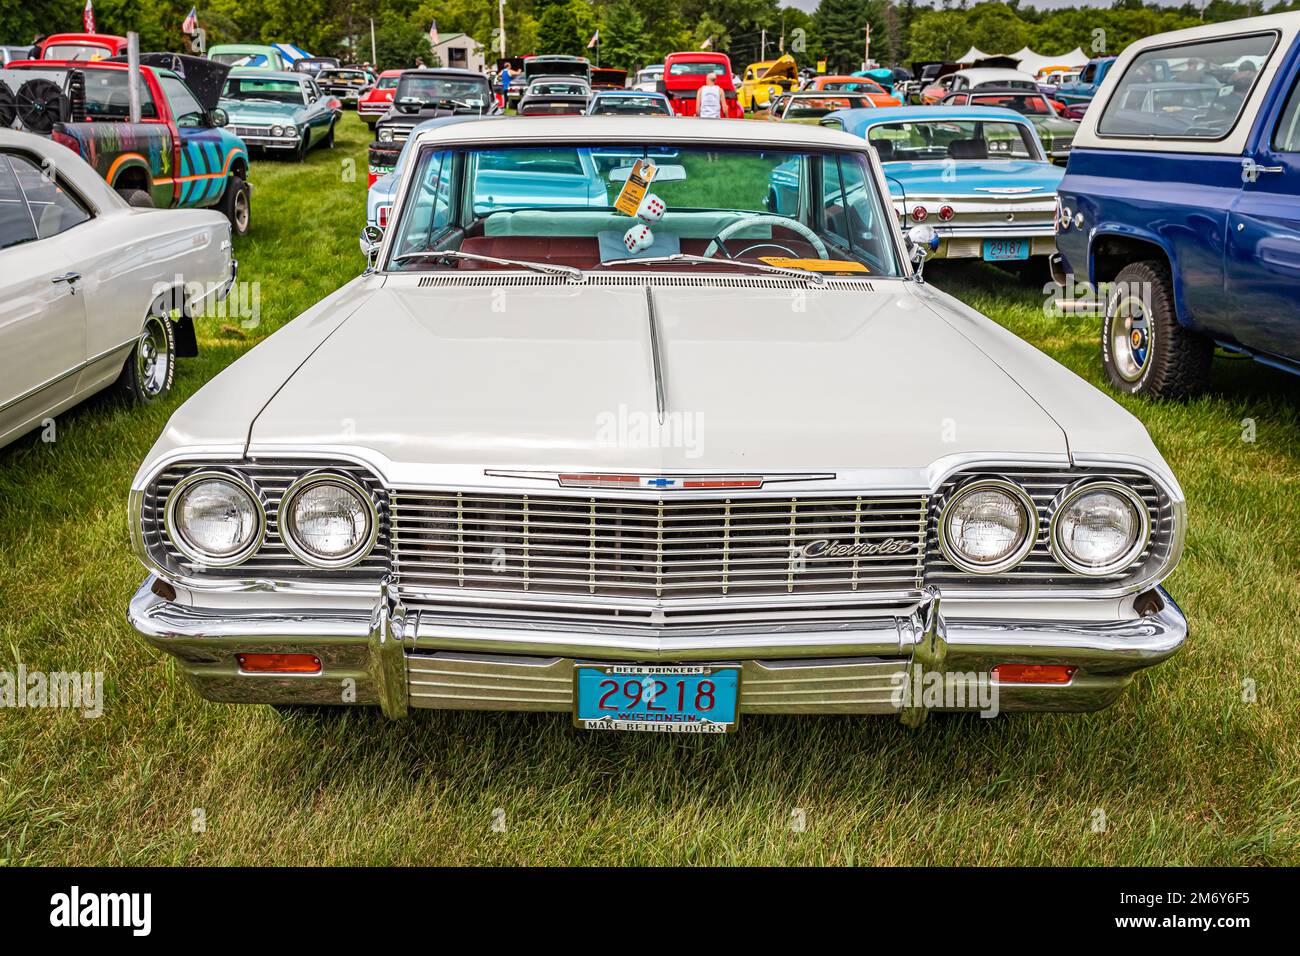 Iola, WI - July 07, 2022: High perspective front view of a 1964 Chevrolet Impala 4 Door Sedan at a local car show. Stock Photo